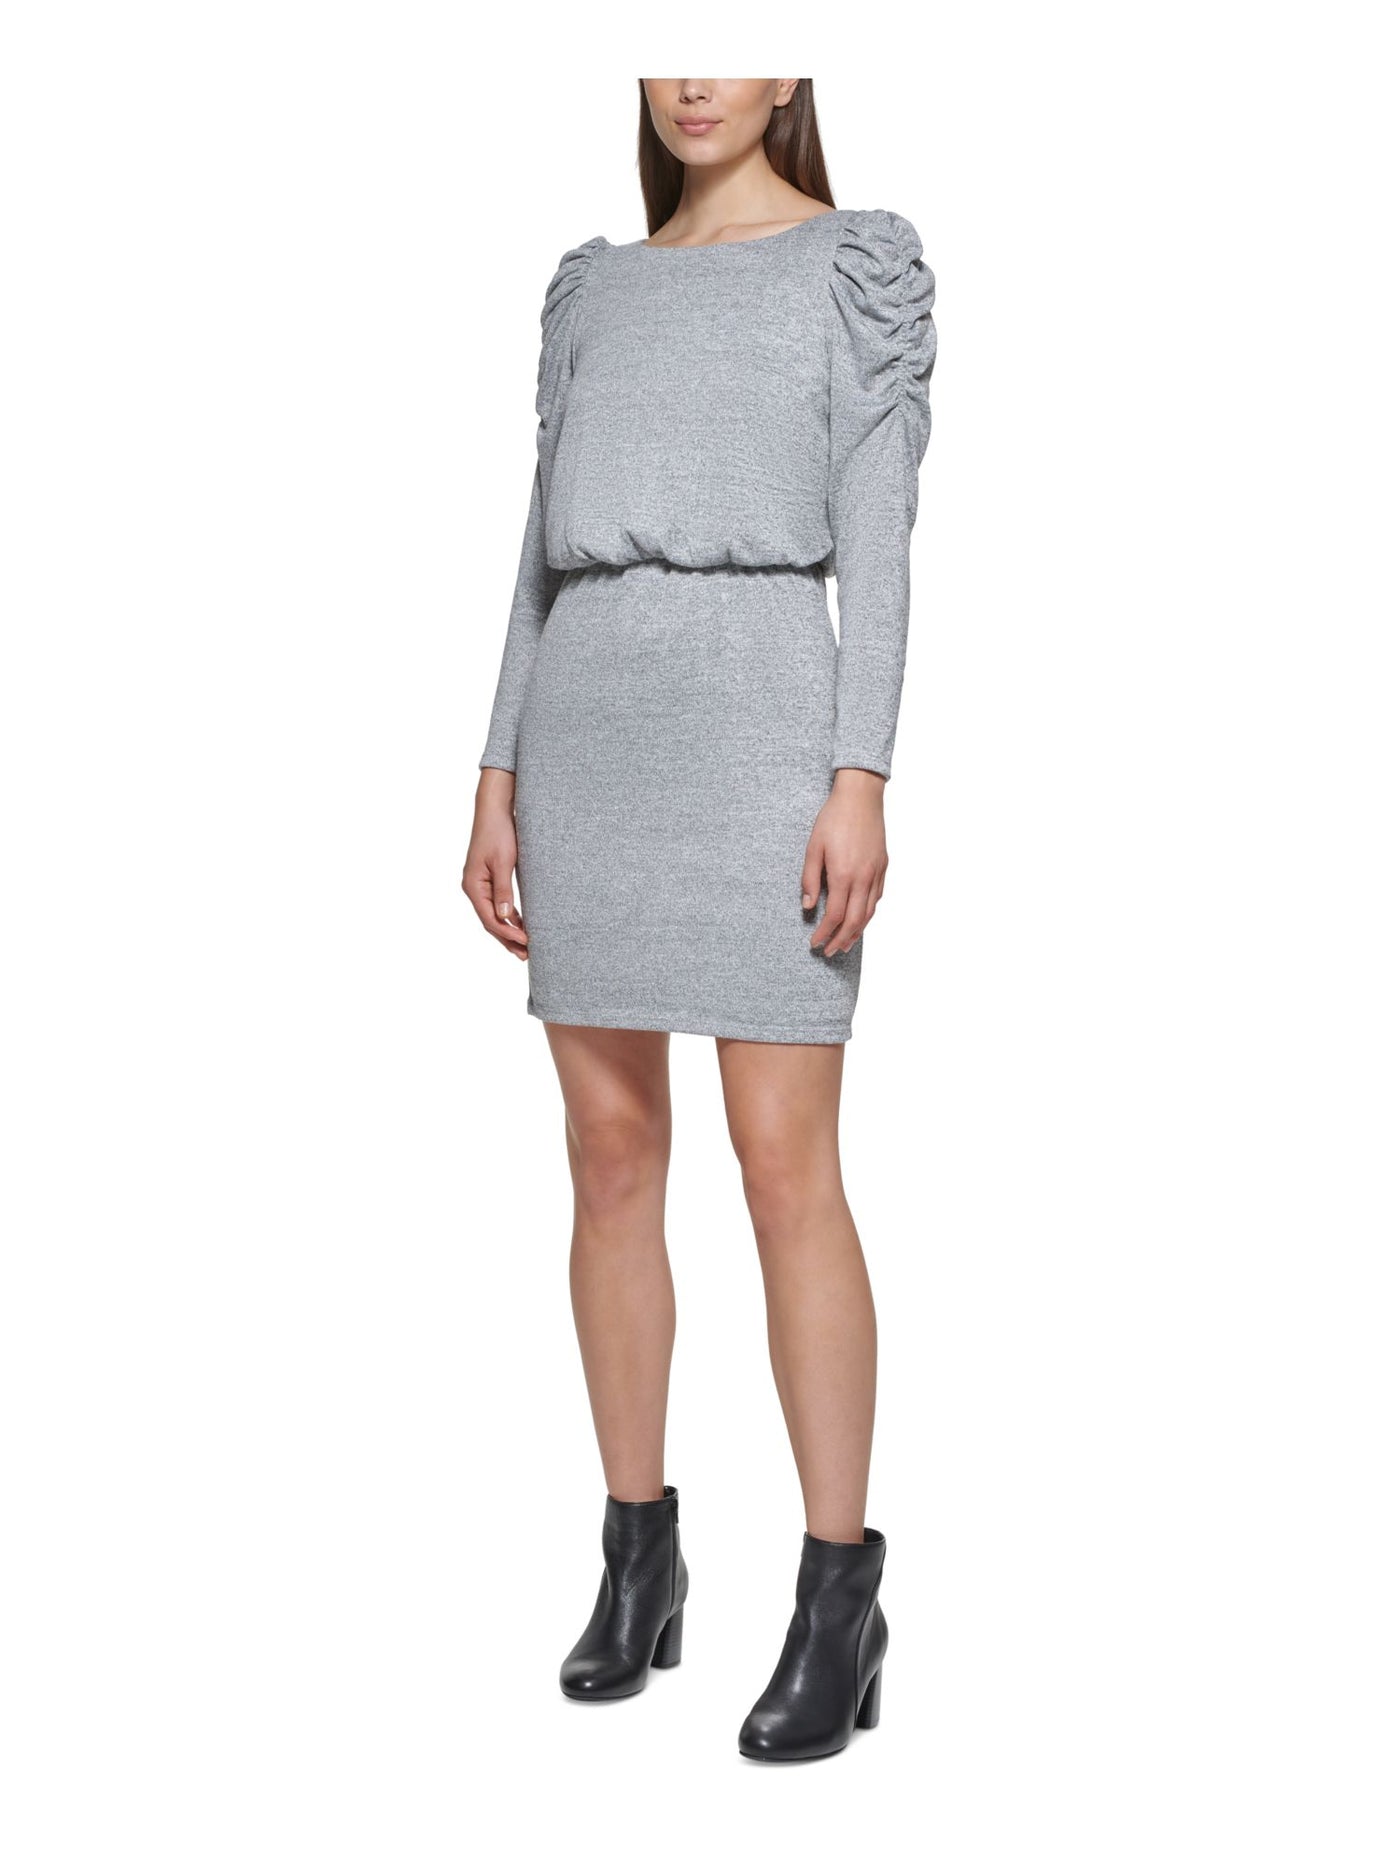 JESSICA HOWARD Womens Gray Metallic Ruched Lined Long Sleeve Jewel Neck Above The Knee Wear To Work Blouson Dress 14